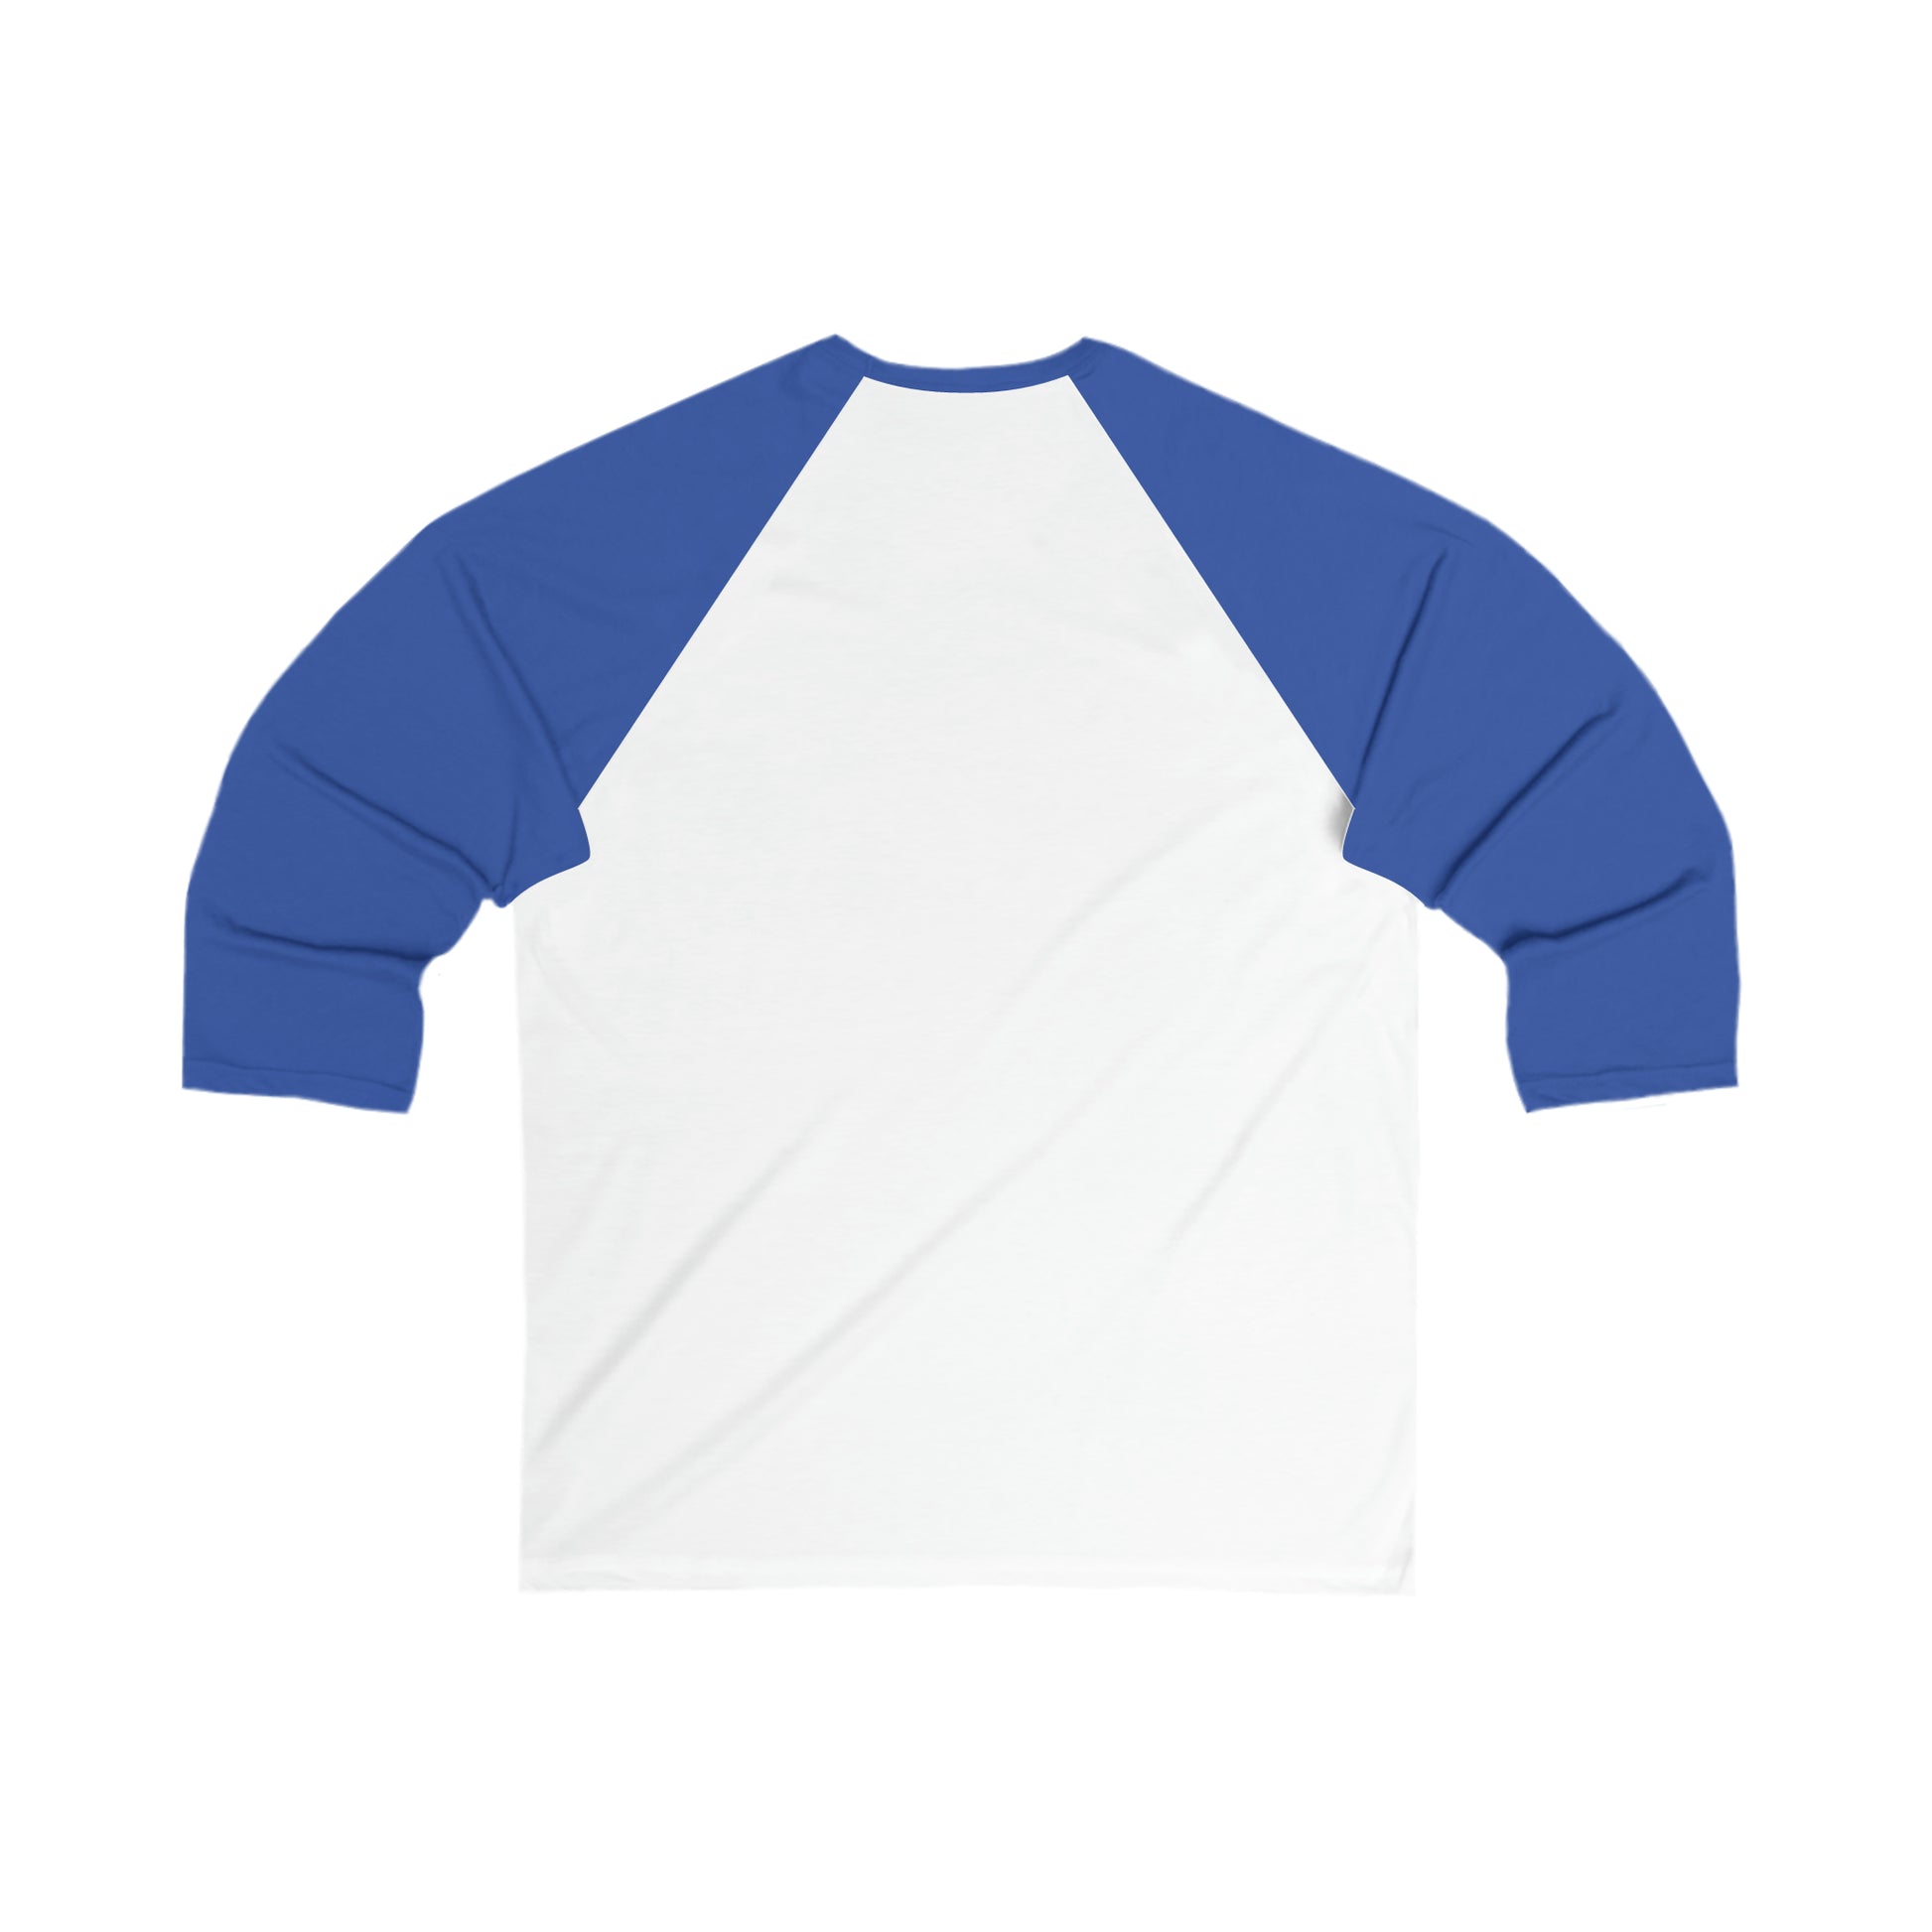 A Printify Unisex 3\4 Sleeve Logo Baseball Tee with white torso and blue raglan sleeves, displayed on a plain white background, inspired by Toronto's Cabbagetown.